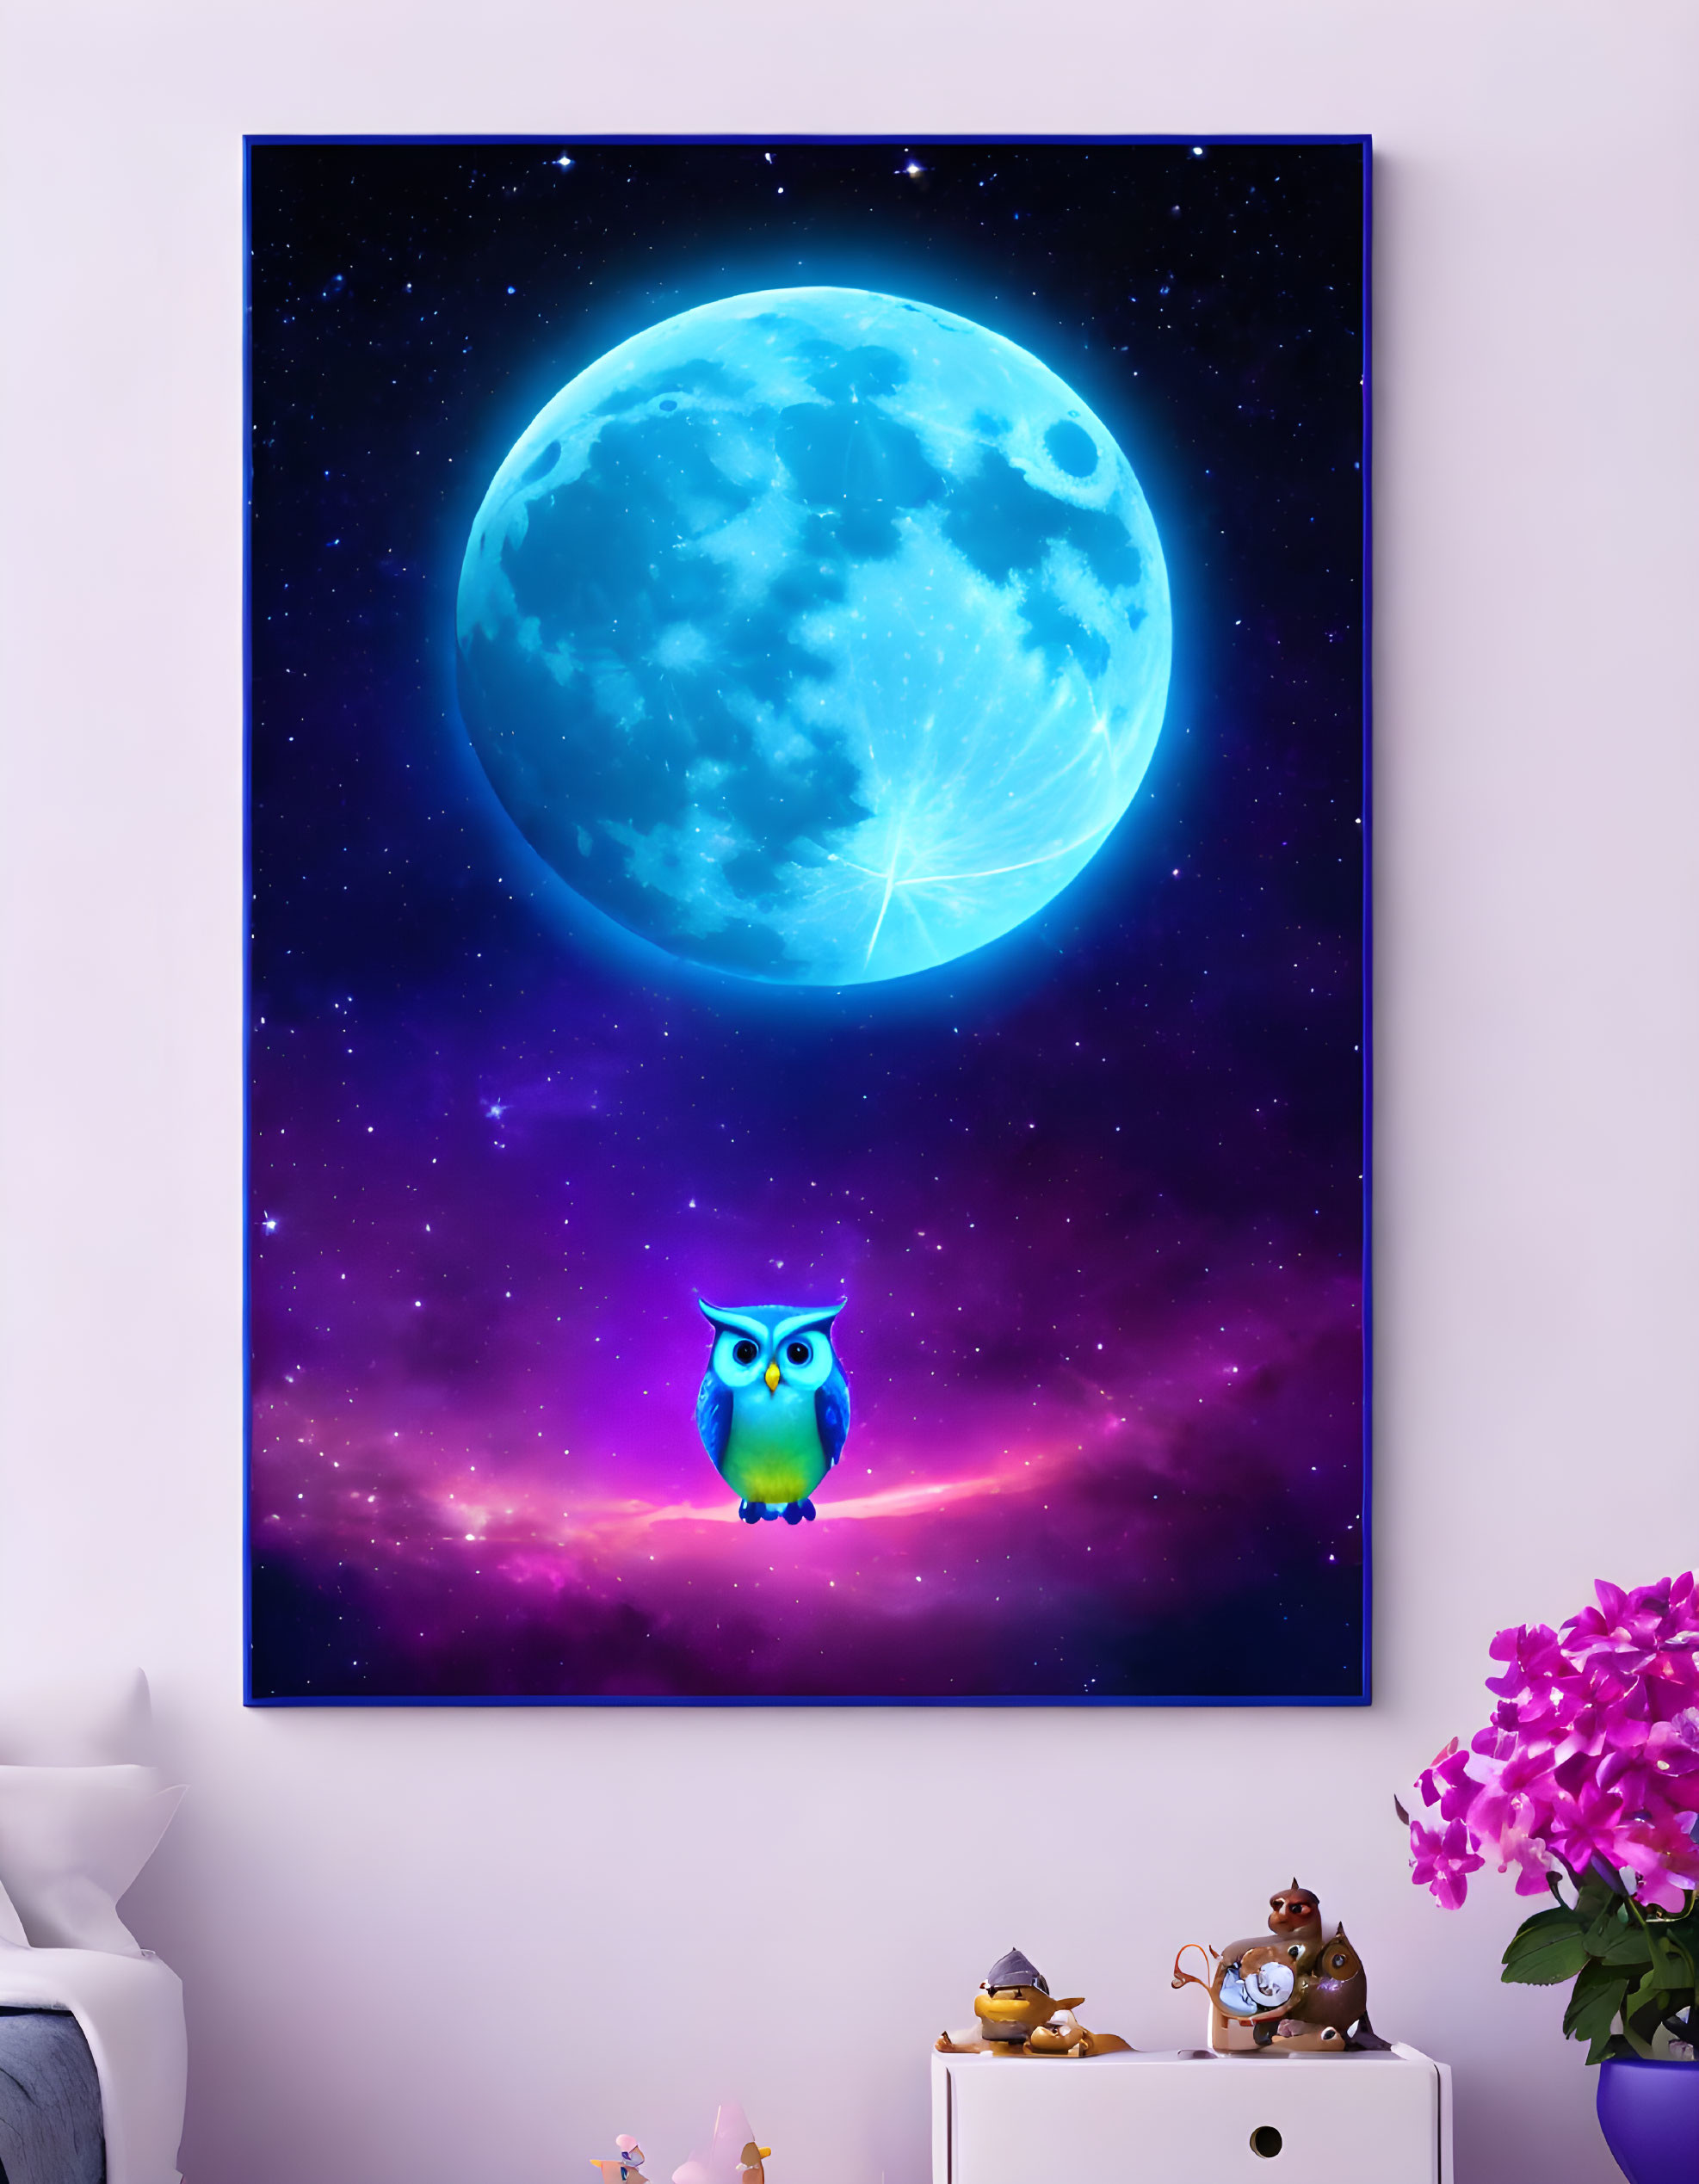 My space owls picture at home